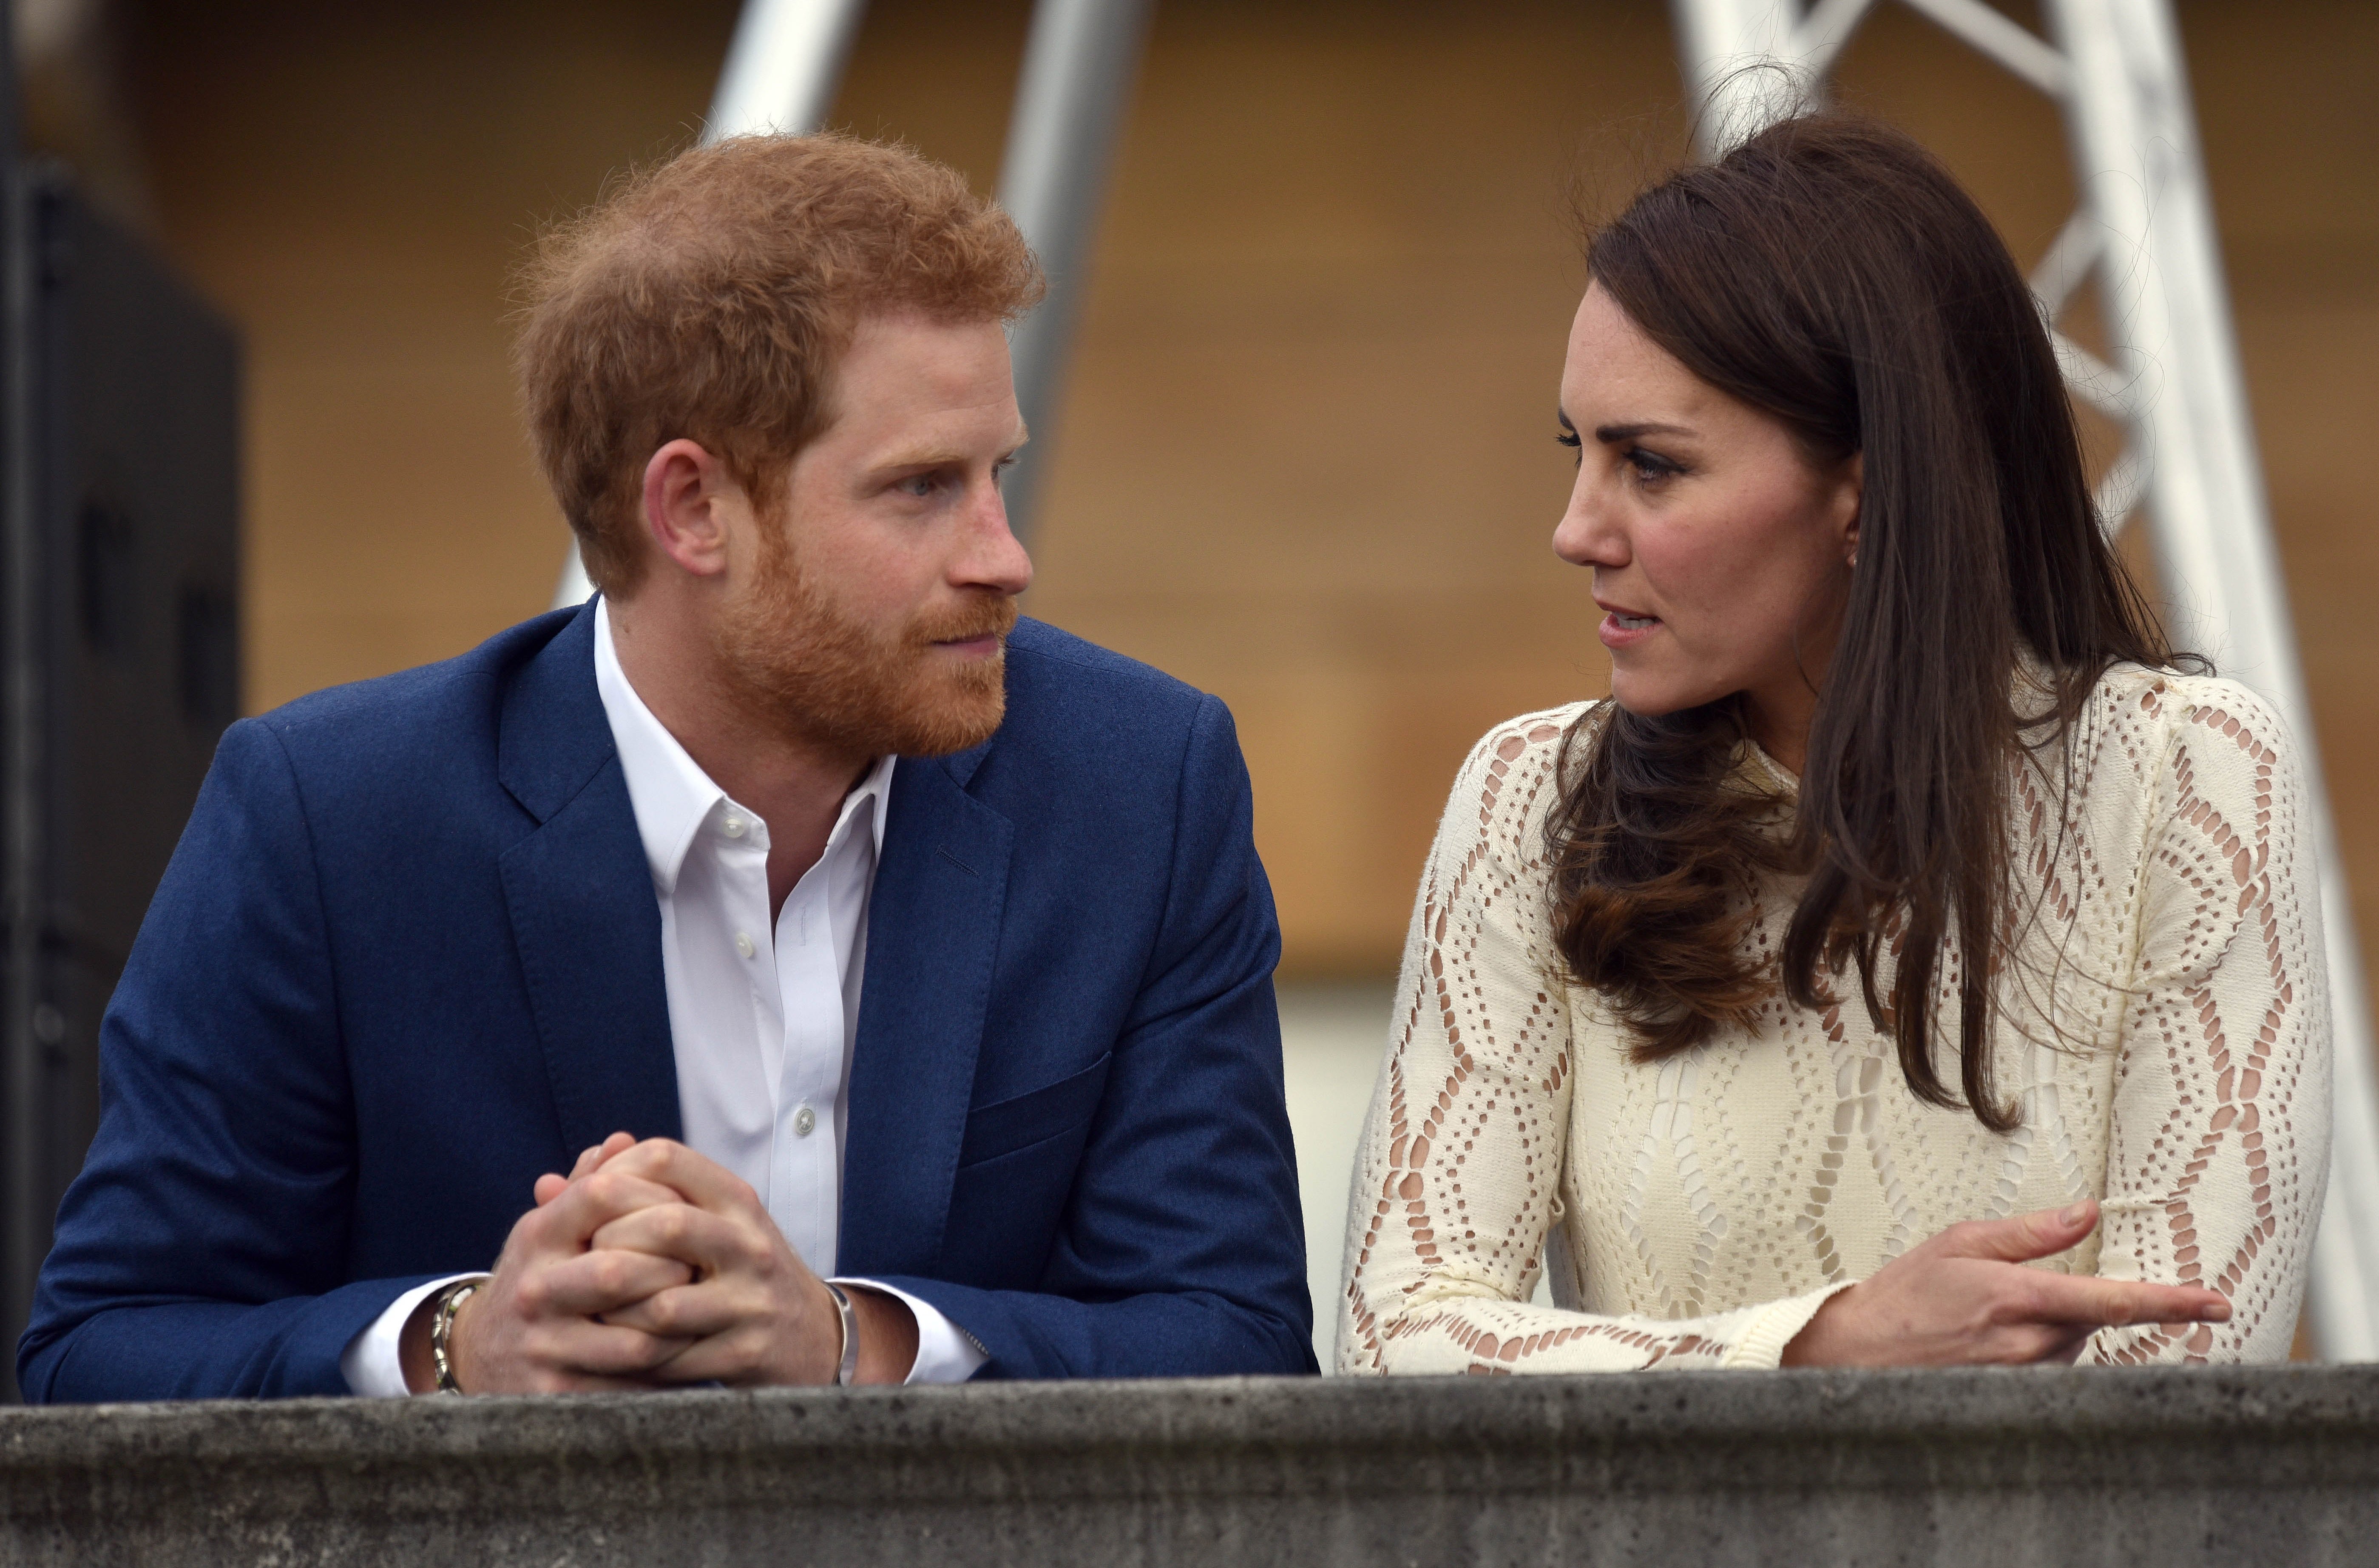 Kate Middleton and Prince Harry pictured in conversation at a tea party in the grounds of Buckingham Palace on May 13, 2017 in London, England. / Source: Getty Images